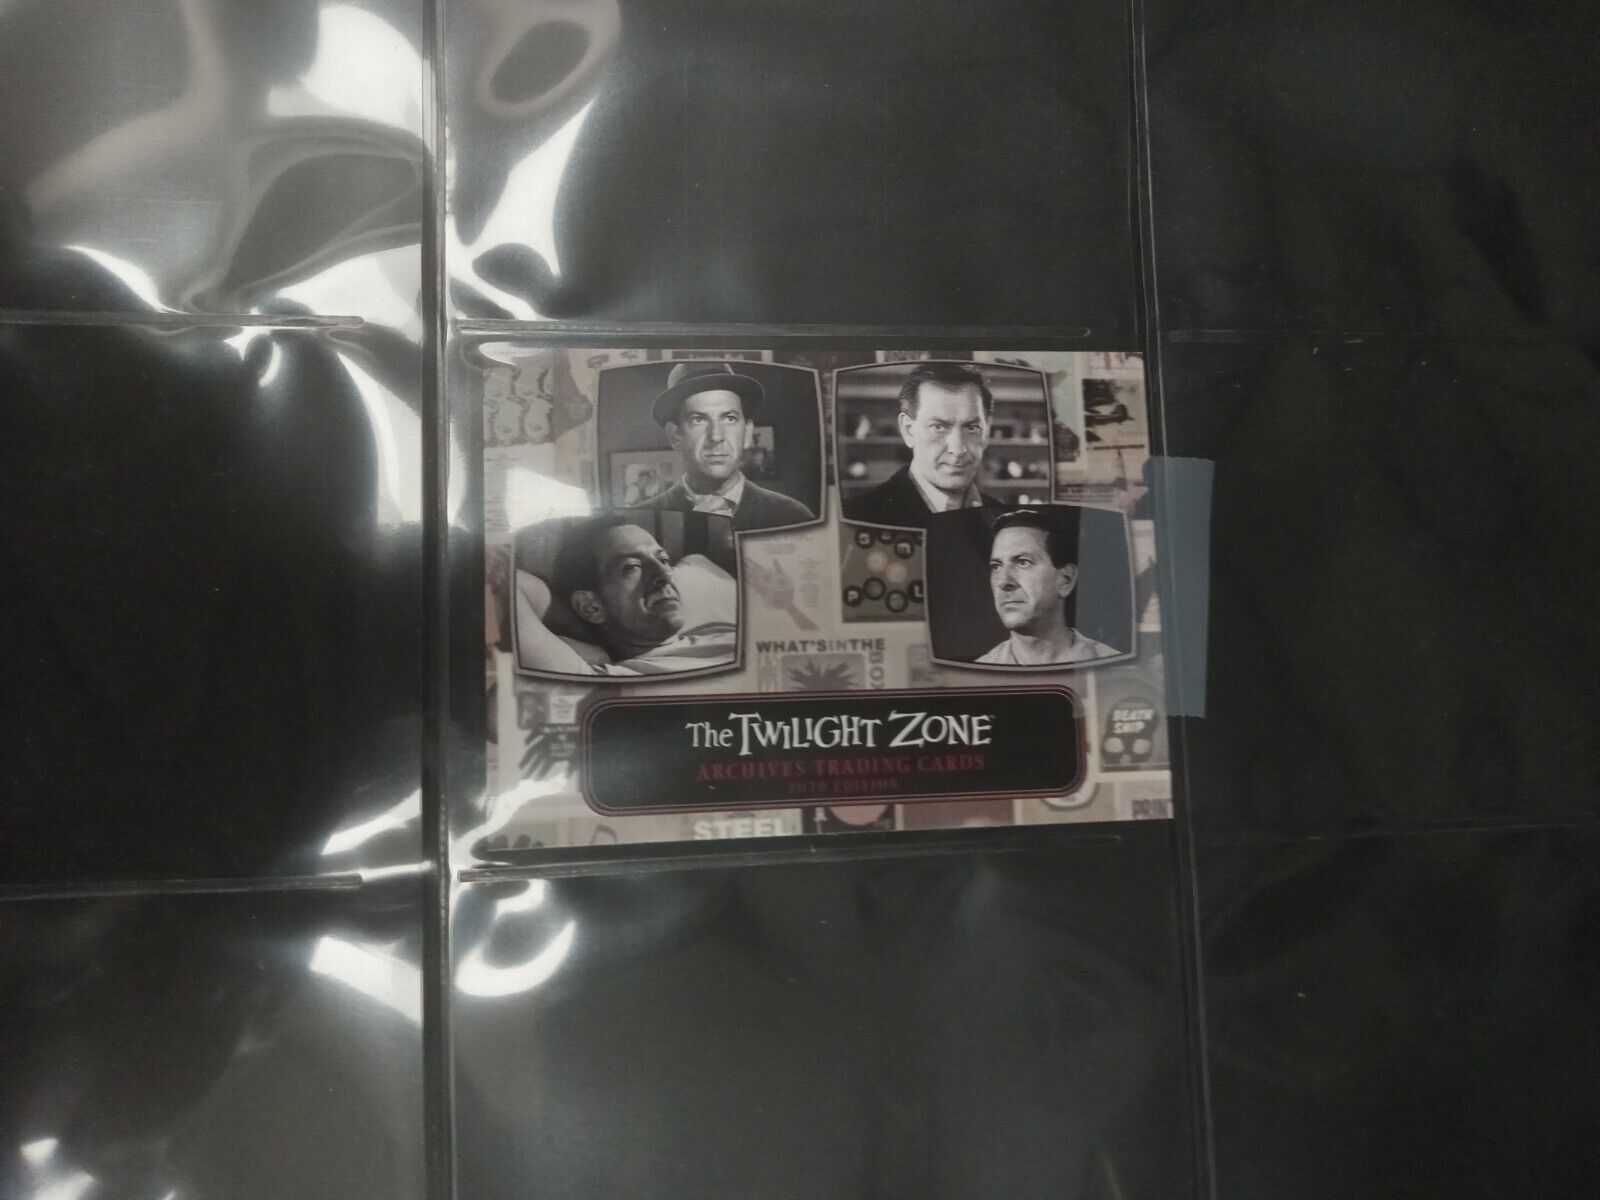 Rittenhouse Twilight Zone 2020 Archives Trading Card Binder with P3 Promo